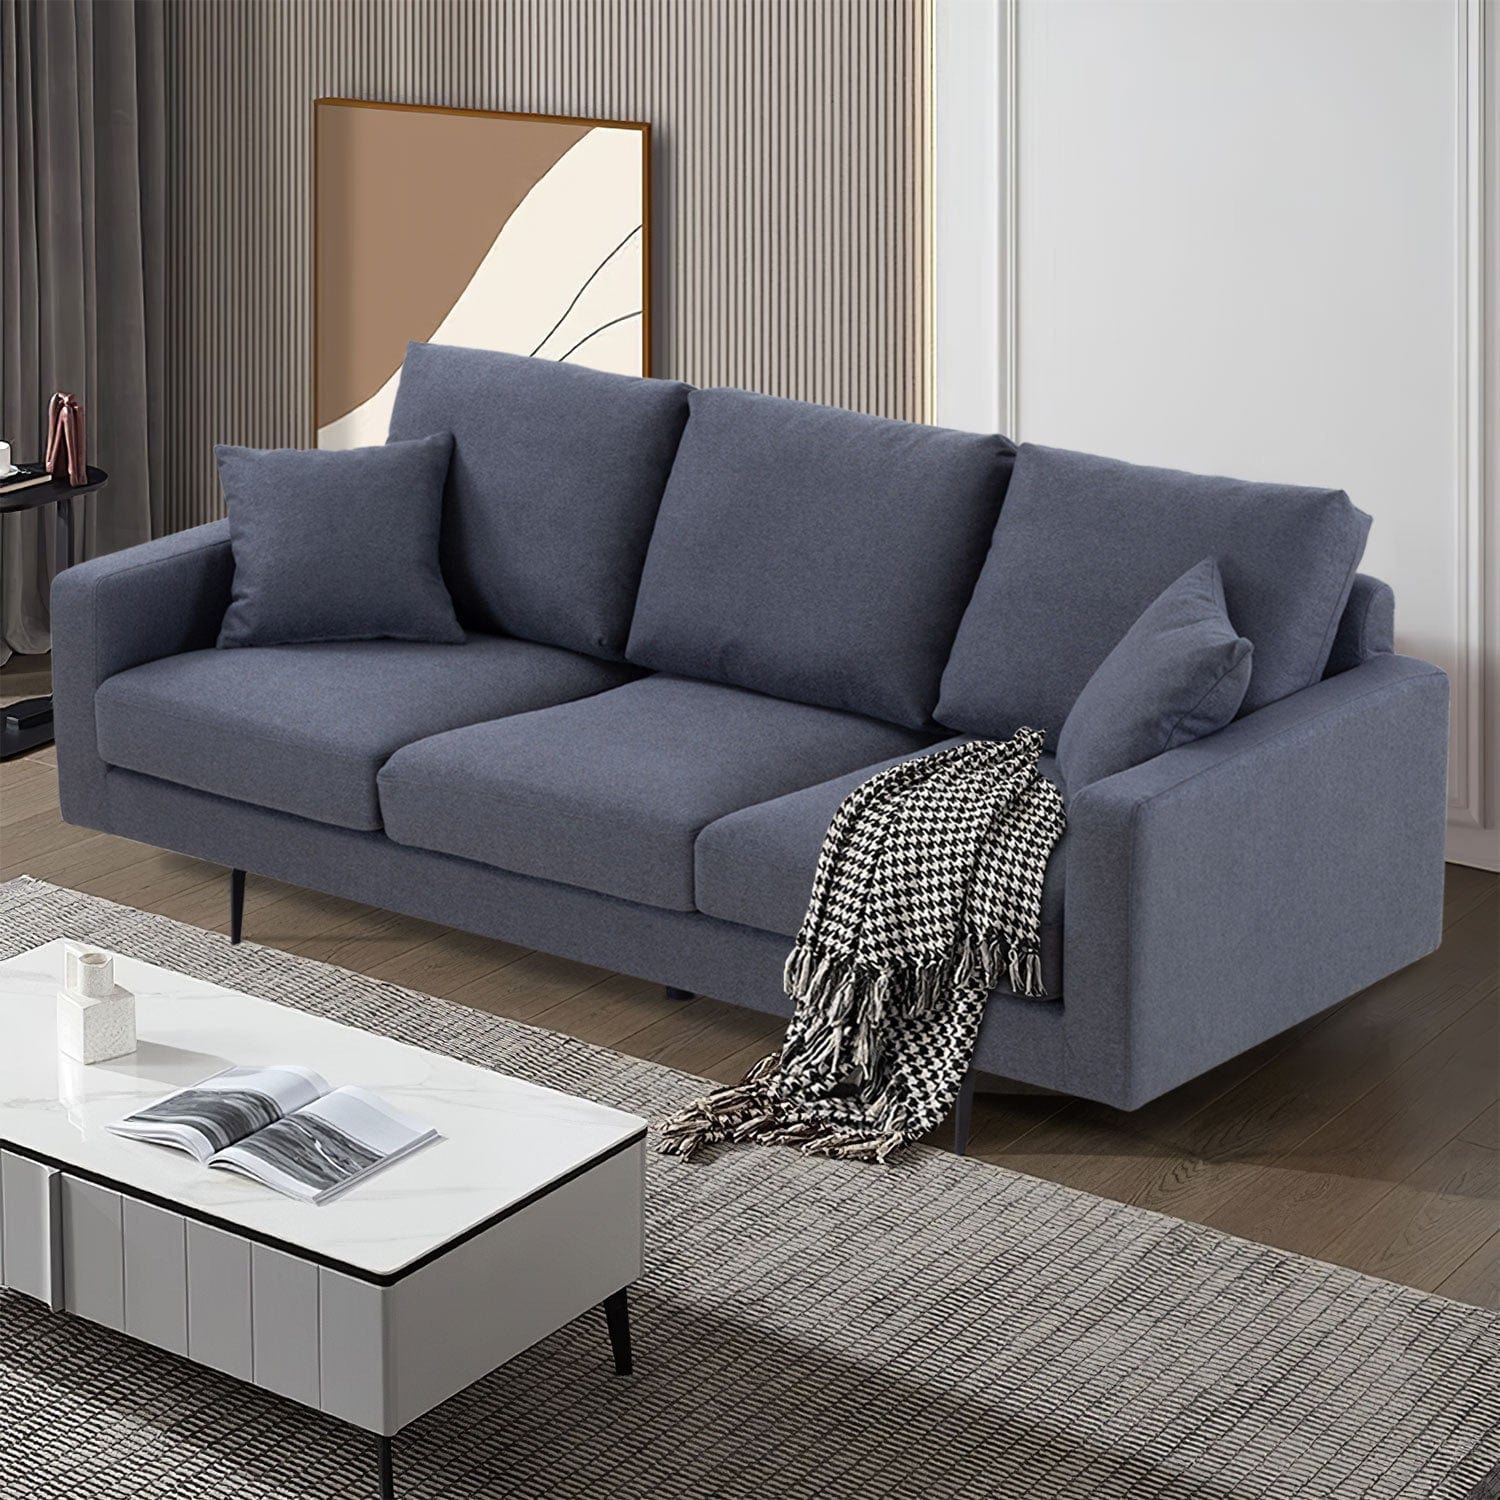 1st Choice Furniture Direct Sofa 1s Choice Contemporary Grey Three-Seat Sofa with Two Pillows